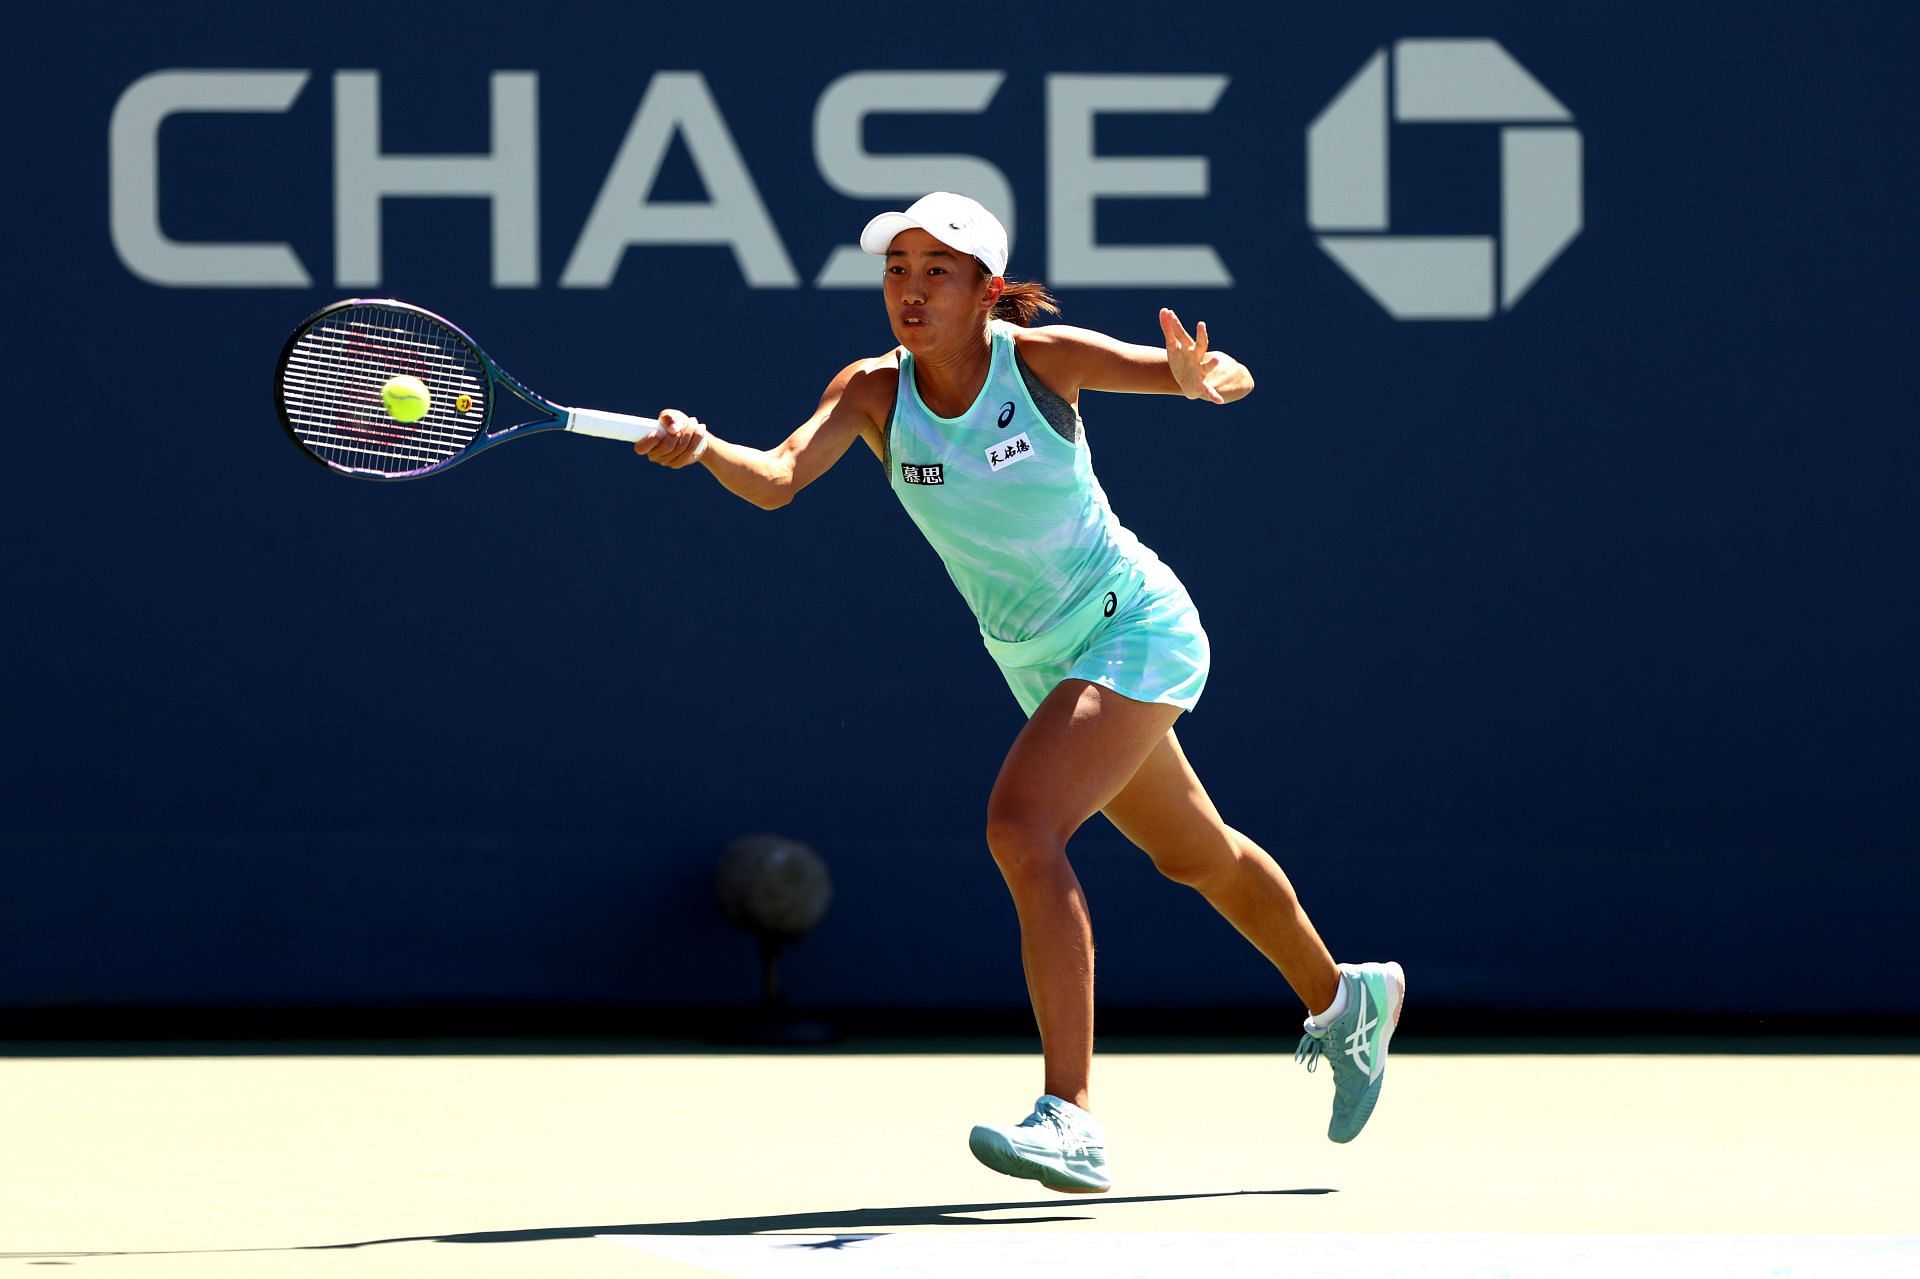 Zhang Shuai reached the last 16 of the US Open for the first time in her career